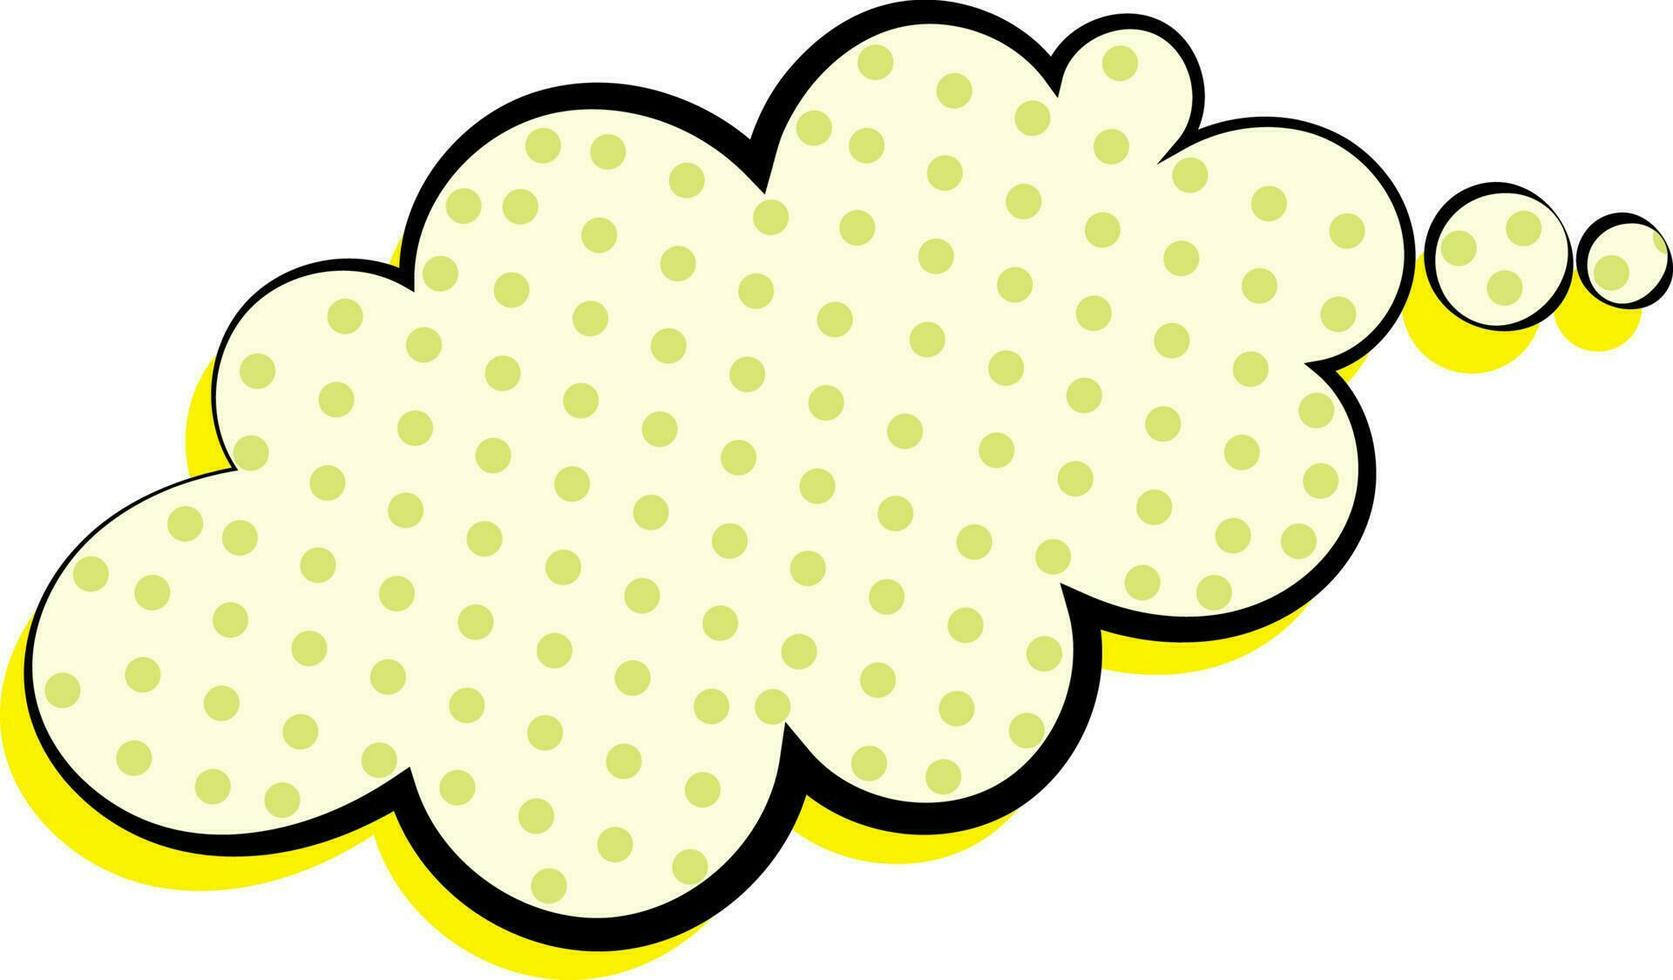 Think cloud bubble made by green dots. vector